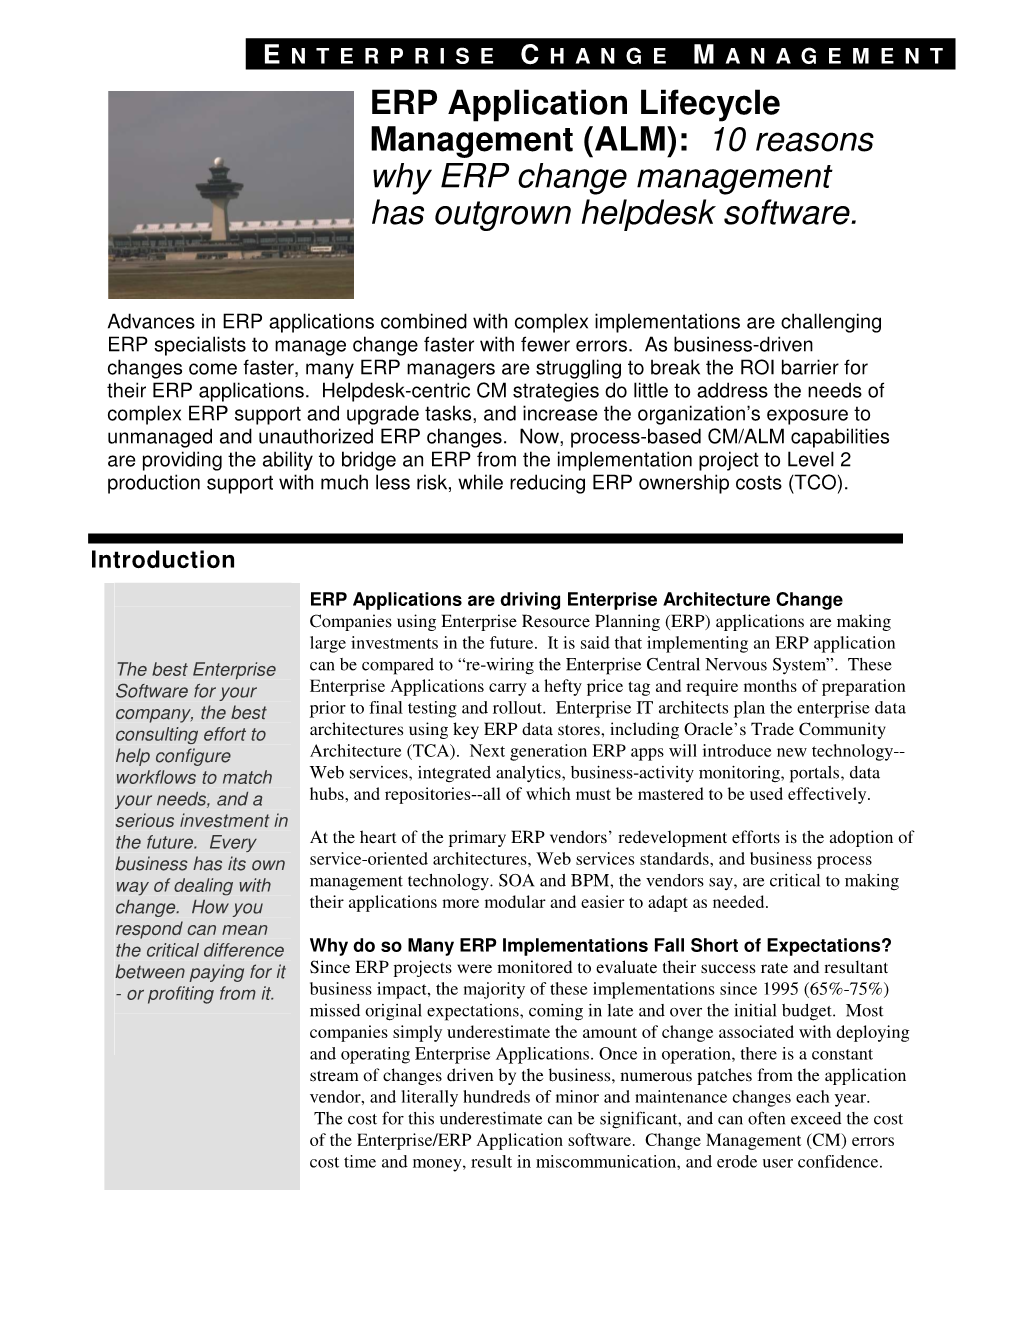 ERP Application Lifecycle Management (ALM): 10 Reasons Why ERP Change Management Has Outgrown Helpdesk Software